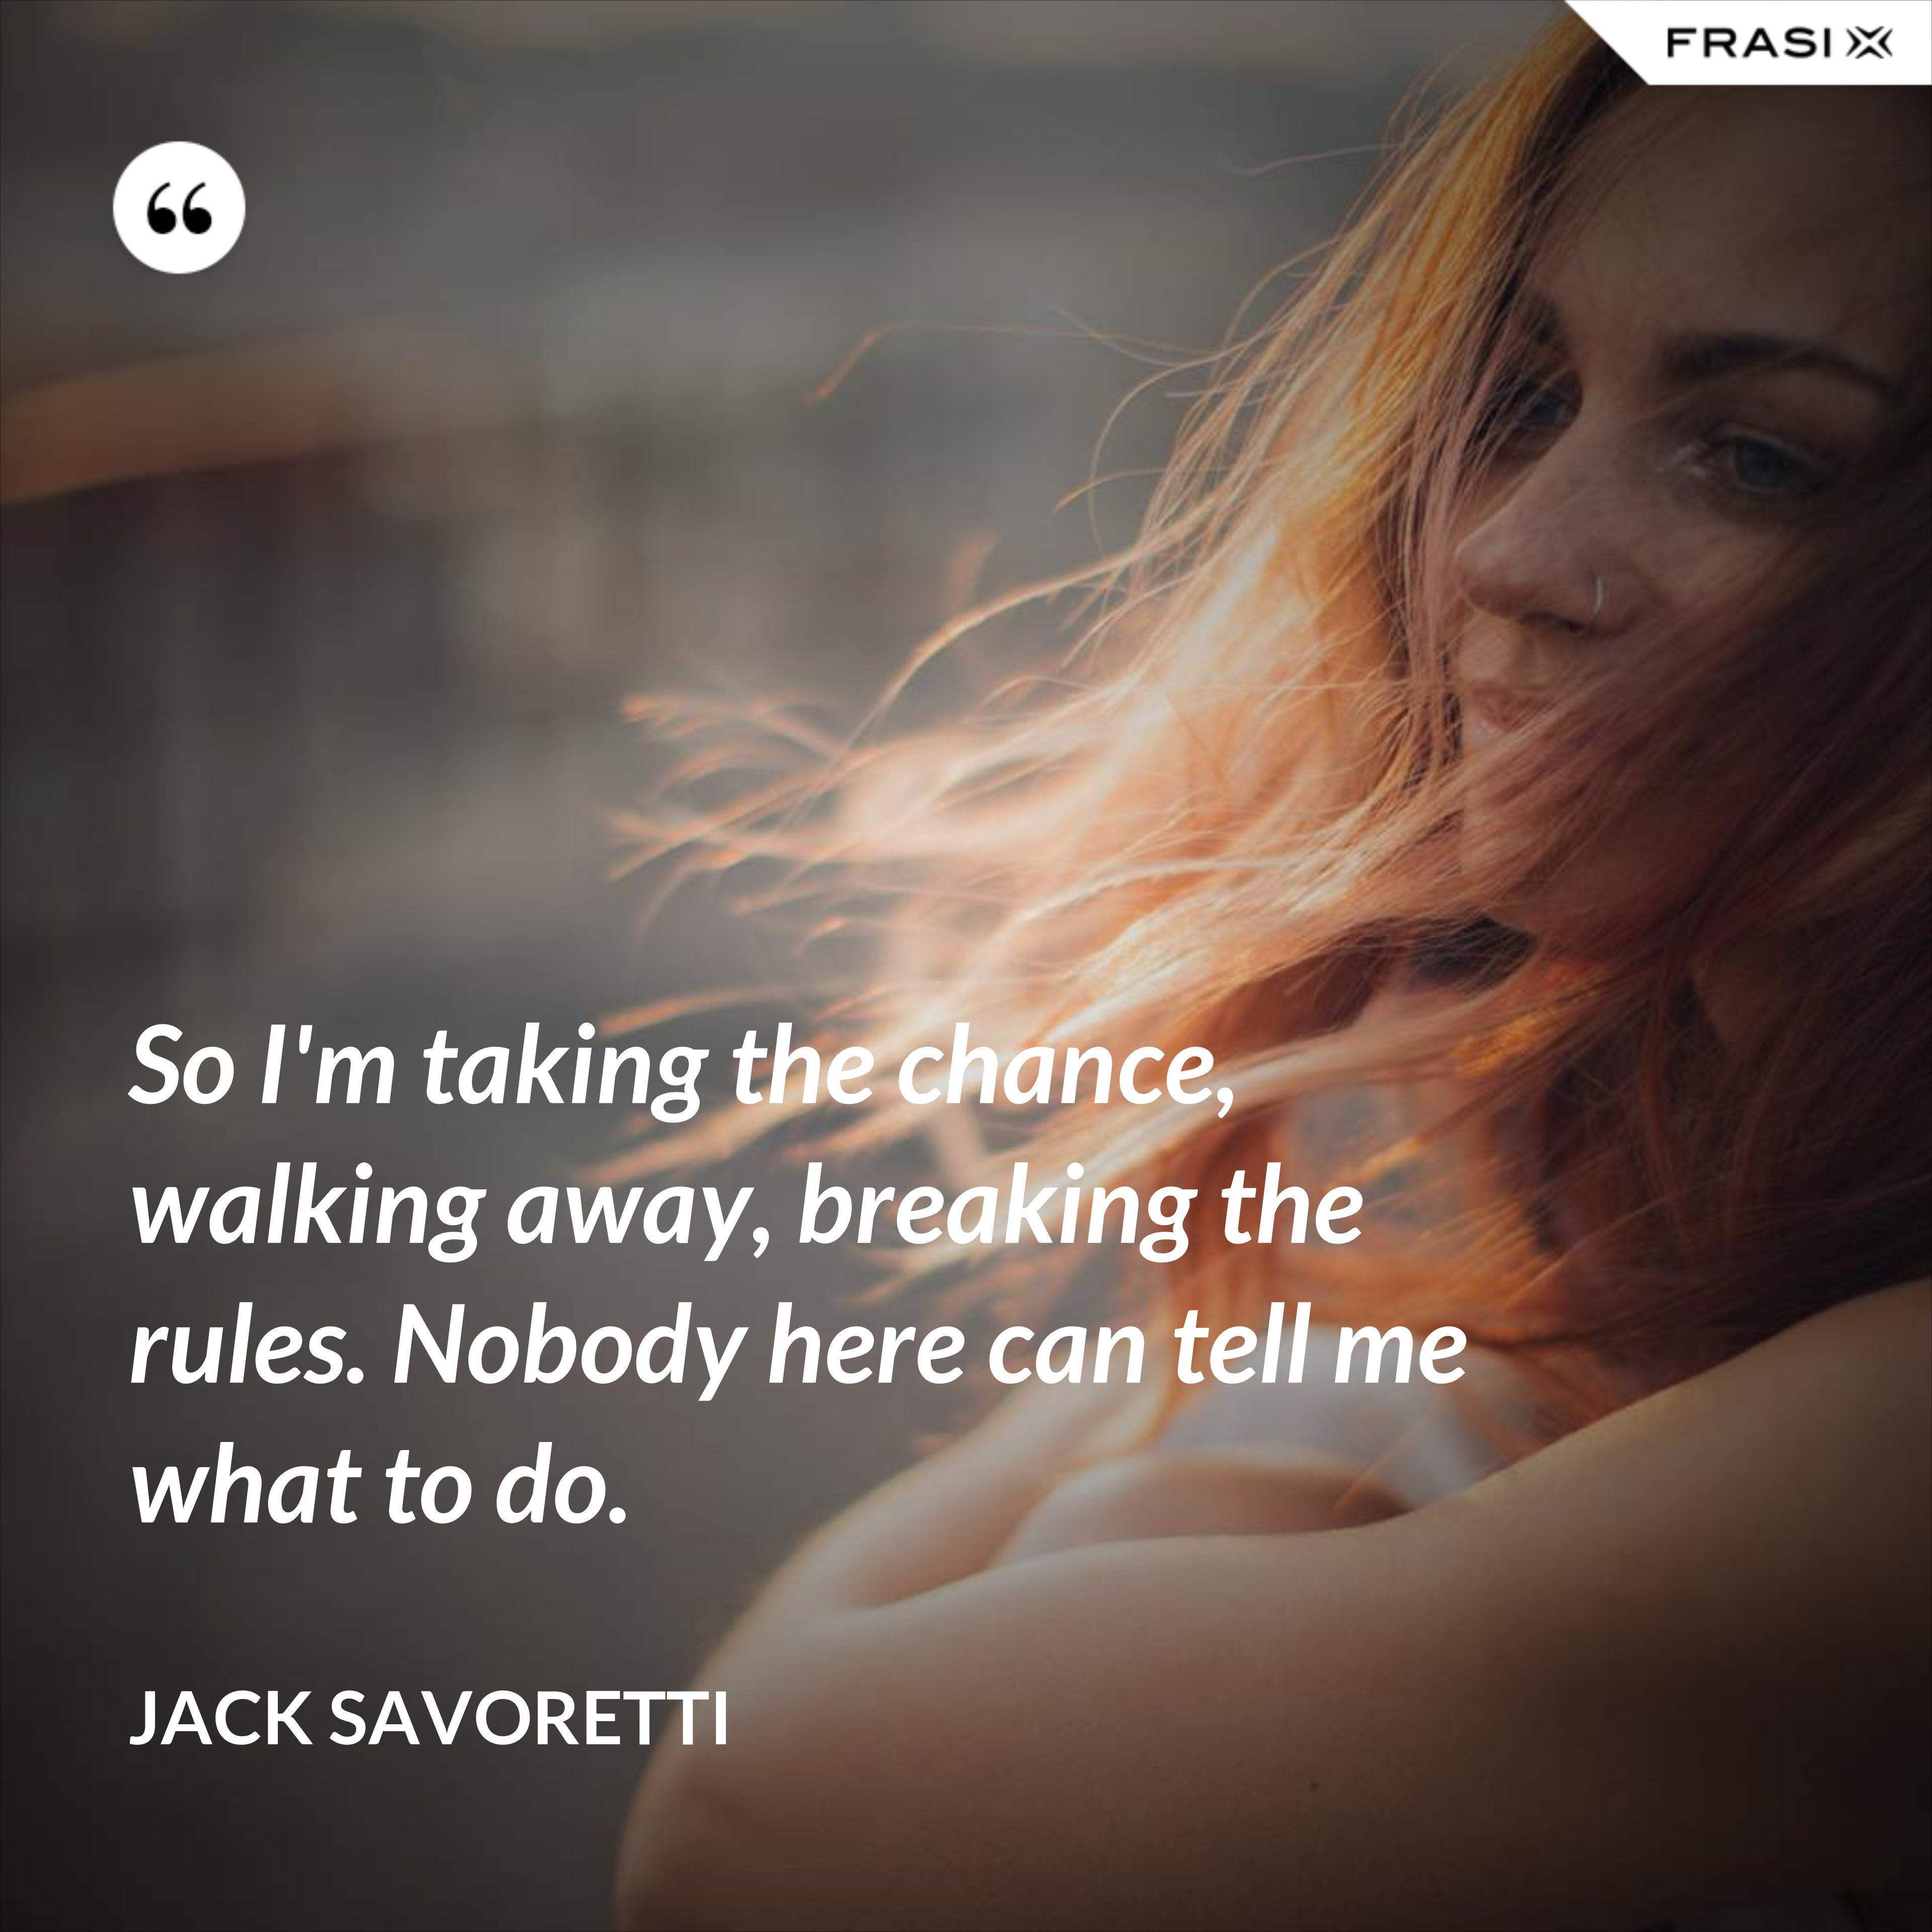 So I'm taking the chance, walking away, breaking the rules. Nobody here can tell me what to do. - Jack Savoretti